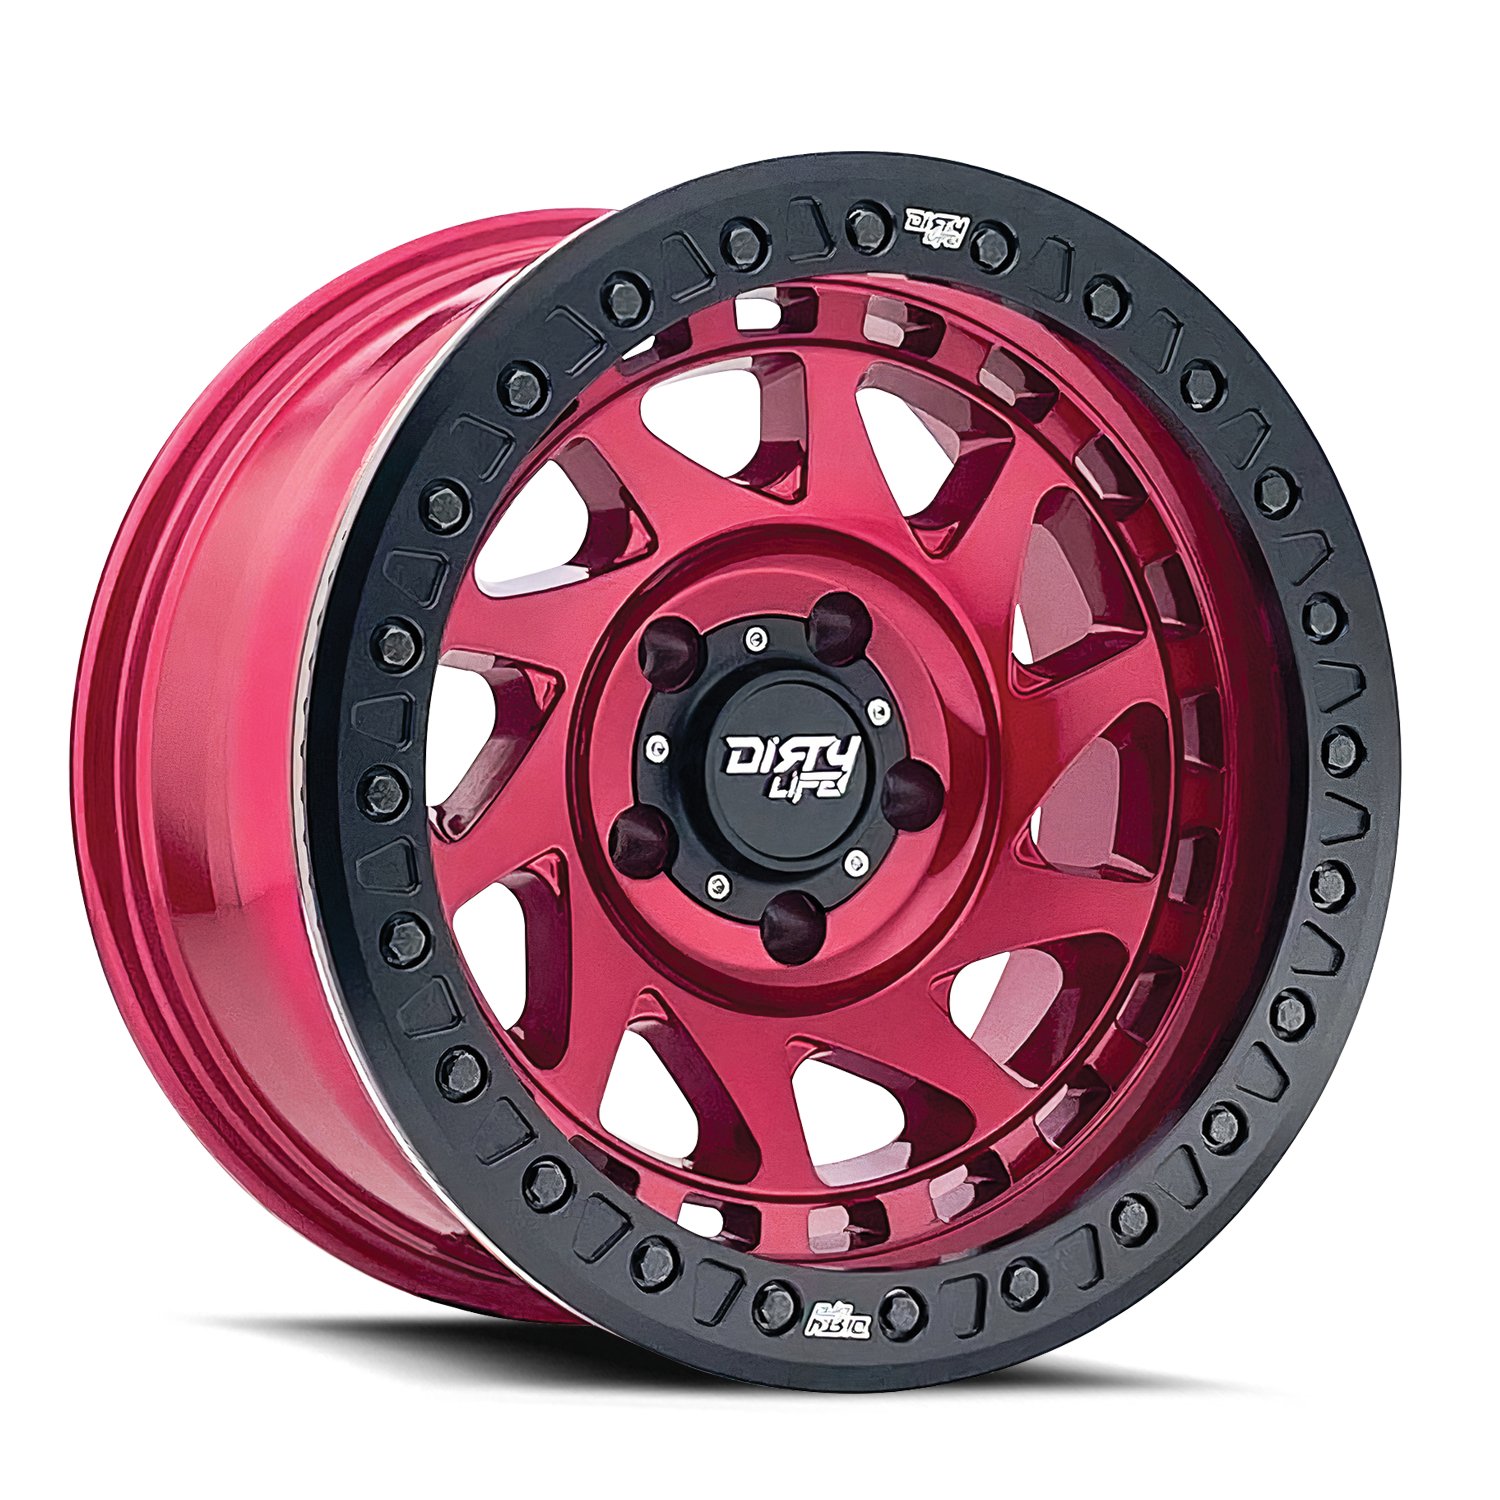 ENIGMA RACE 9313 Wheel Size: 17 X 9" Bolt Pattern: 6-139.7 [CRIMSON CANDY RED]